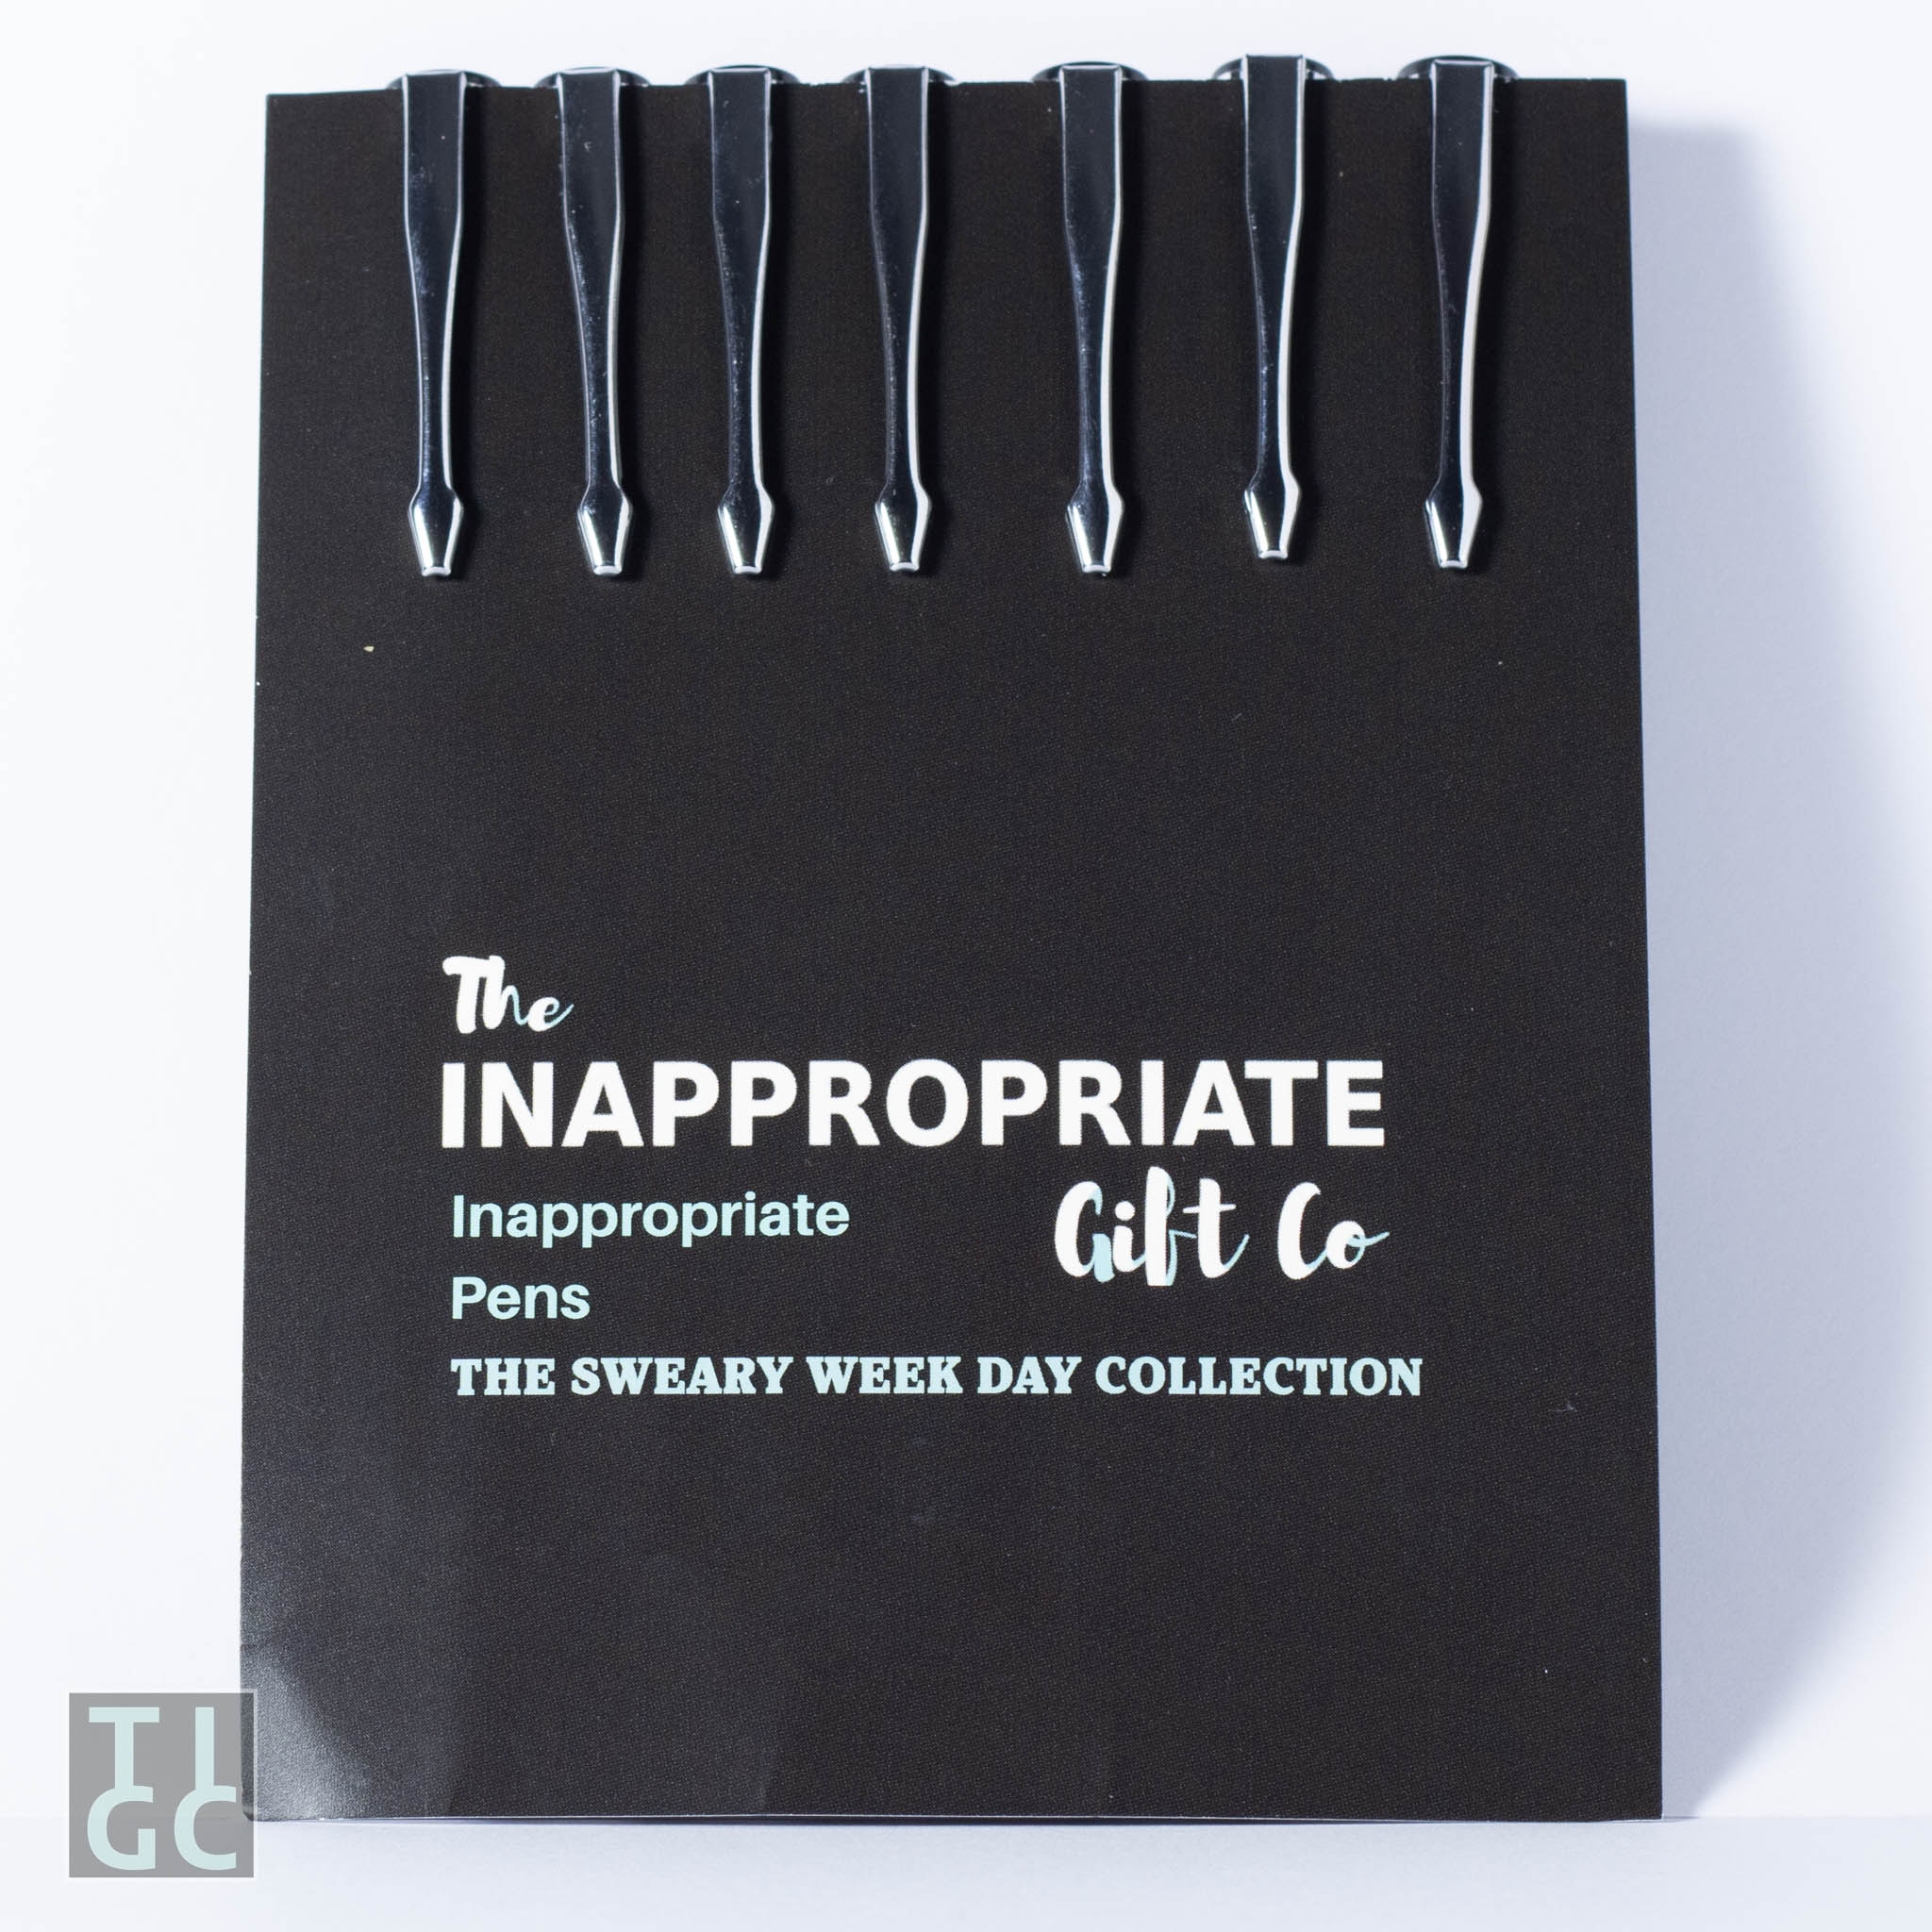 https://theinappropriategiftco.com/cdn/shop/products/tigc-the-inappropriate-gift-co-inappropriate-pens-the-sweary-week-collection-30028924026922_5000x.jpg?v=1668408536